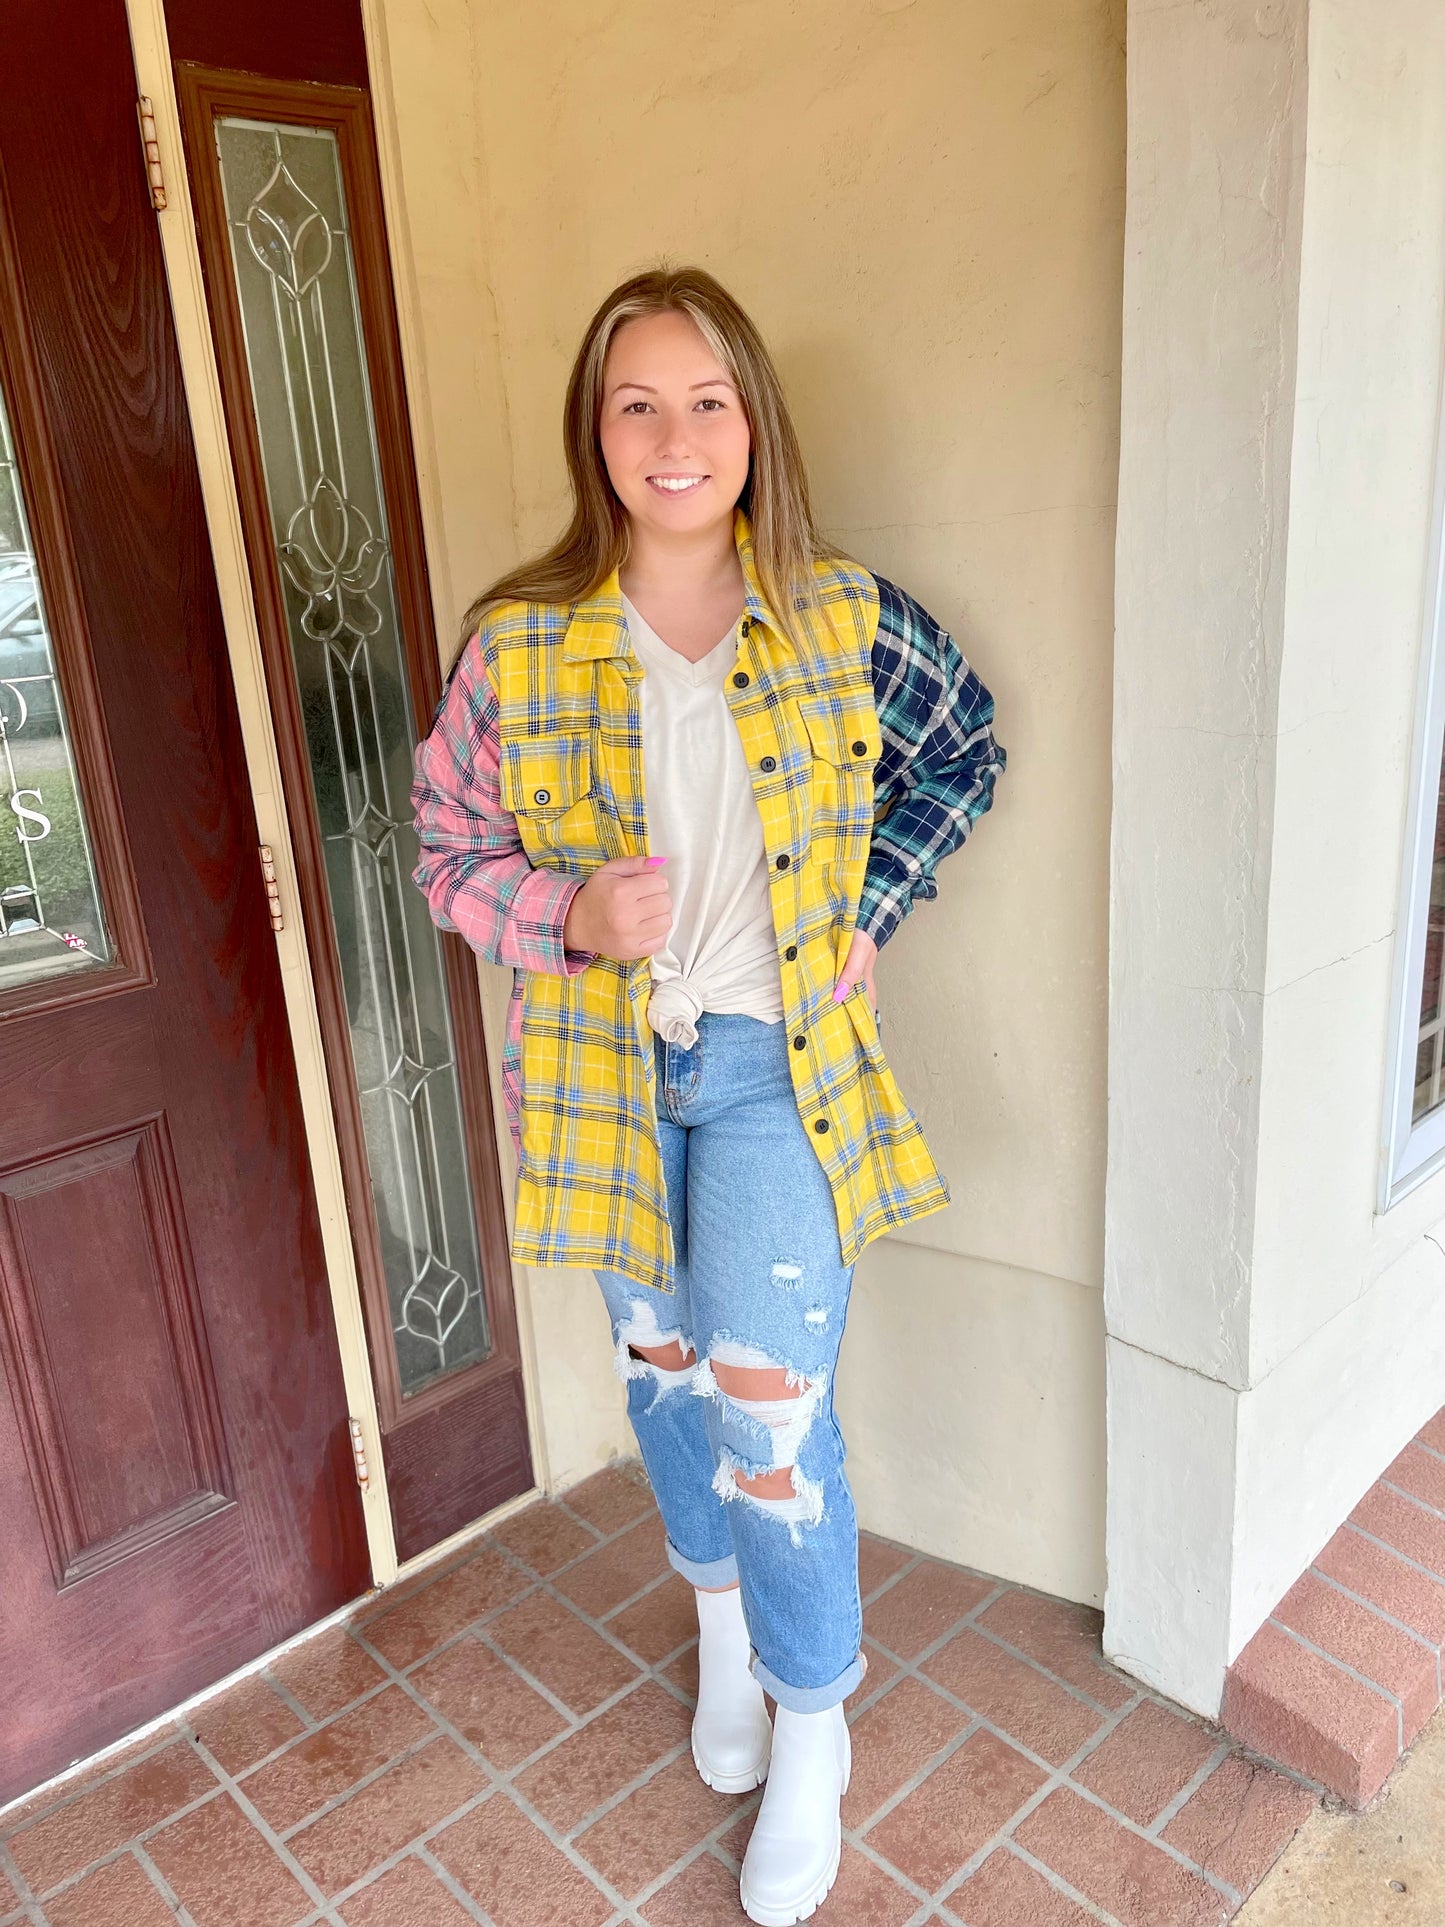 Pink, Butterscotch, and Navy Plaid Color Block Shirt